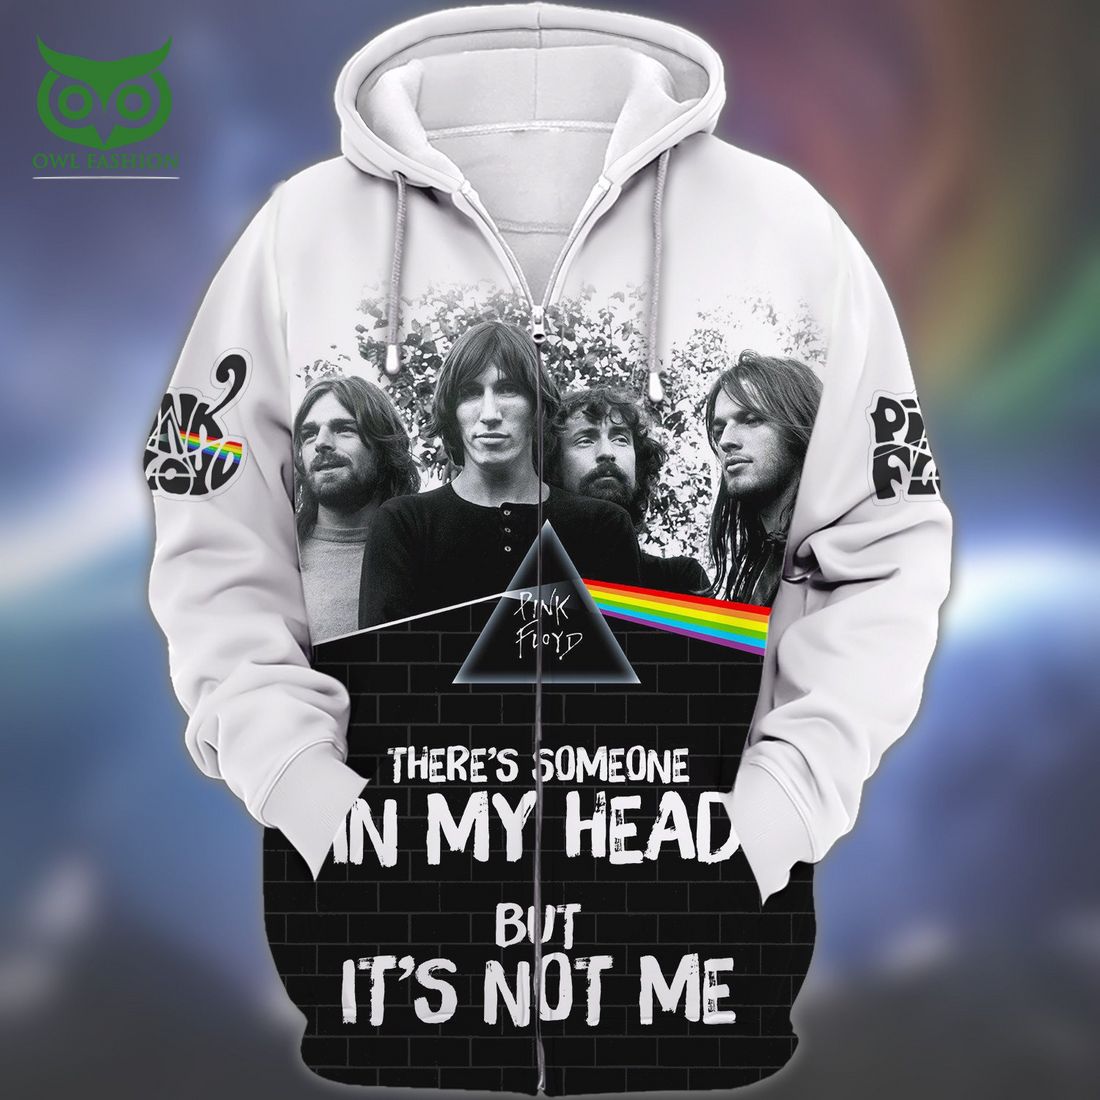 pink floy someone in my head but not me 3d shirt 1 4jqC6